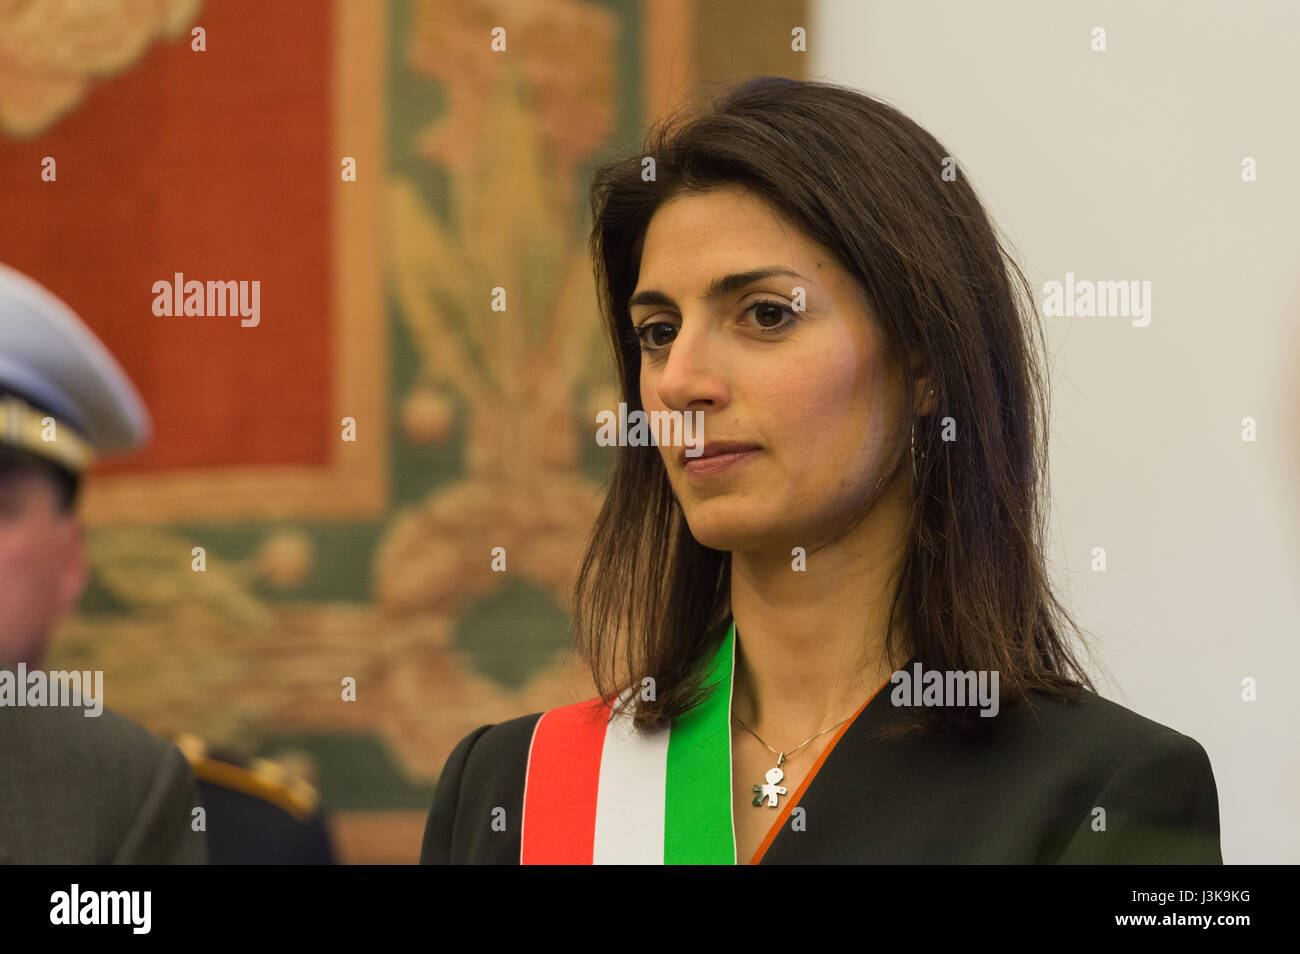 Rome, Italy. 05th May, 2017. The funeral of the founder and several times director of the communist daily 'the manifesto' took place in the Sala del Protomoteca in Capitol. Present at the ceremony beyond the family members, the Mayor of Rome, Virginia Raggi, Lucina Castellina, Emanuele Macaluso, Aldo Tortorella and other political figures, former daily directors and current director Norma Rangieri. The Mayor of Rome, Virginia Raggi Credit: Leo Claudio De Petris/Pacific Press/Alamy Live News Stock Photo